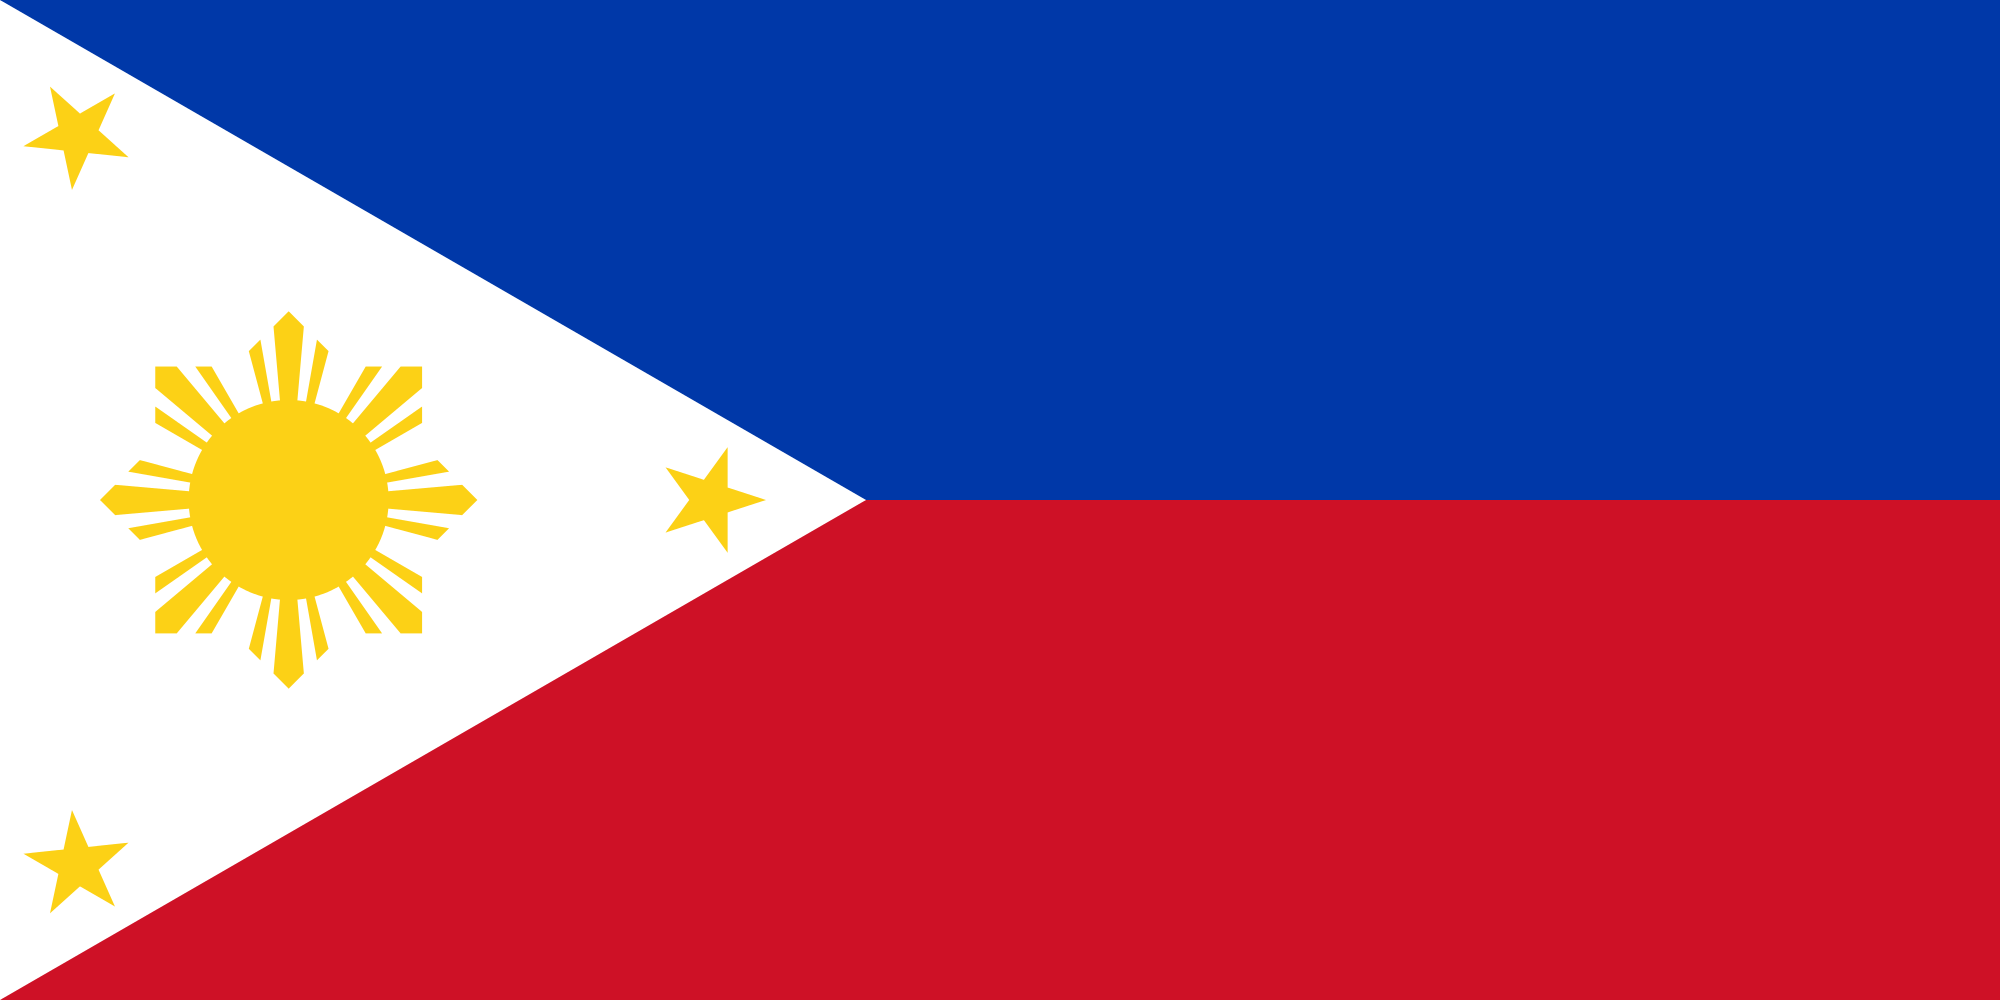 Download File:Flag of the Philippines 5 10 15.svg - Wikimedia Commons